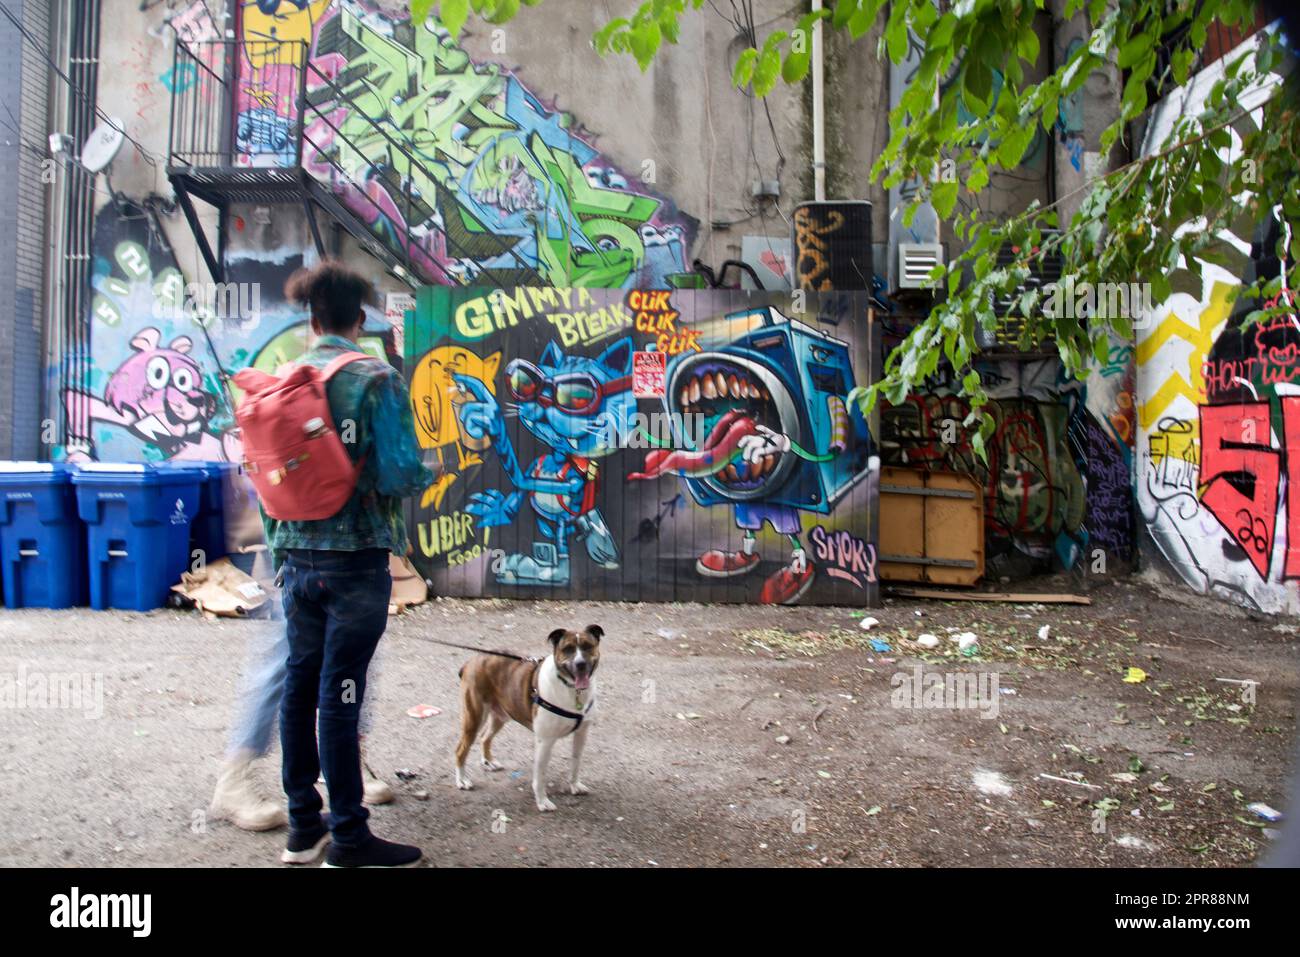 Toronto, Ontario / Canada - Sept. 24, 2022: A woman walking a dog with colourful graffiti background Stock Photo